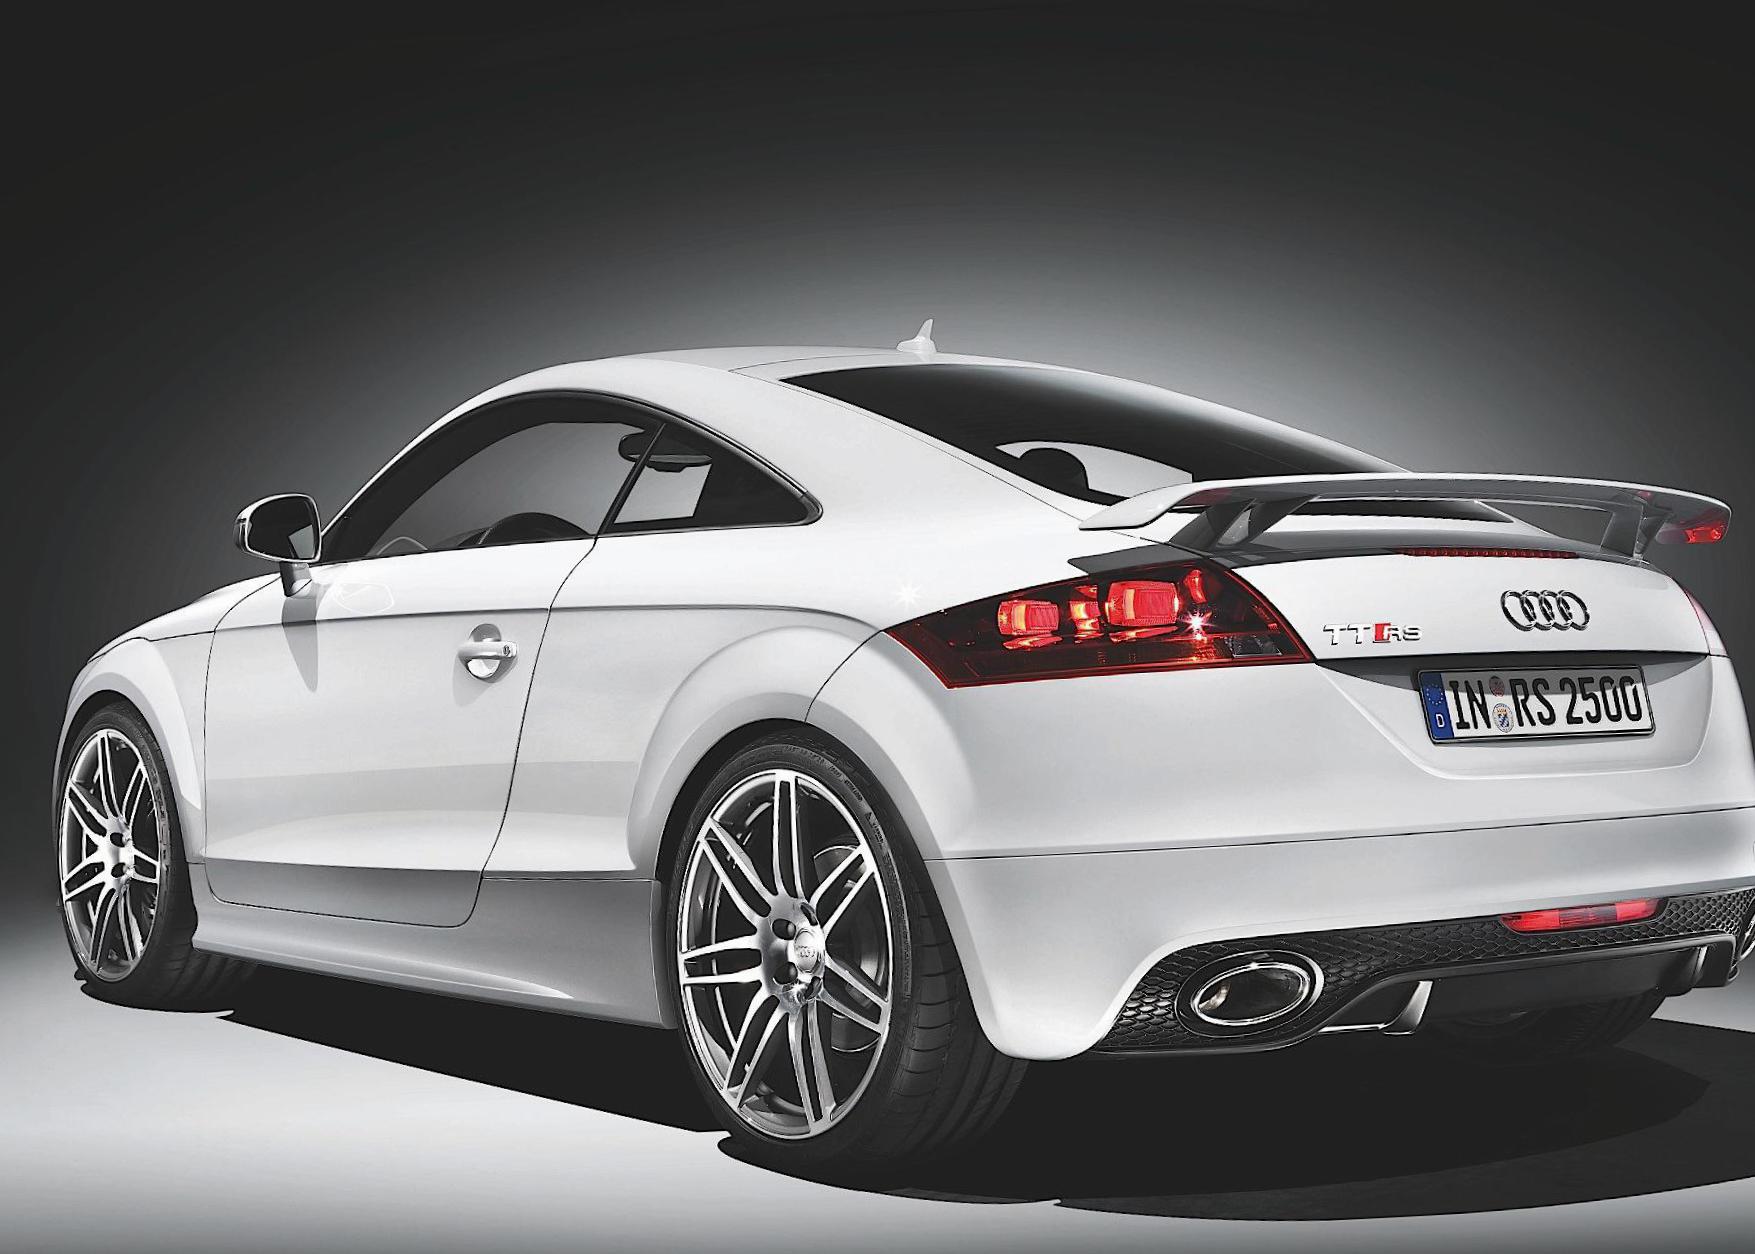 Audi TT RS Coupe Photos and Specs. Photo: Audi TT RS Coupe ...